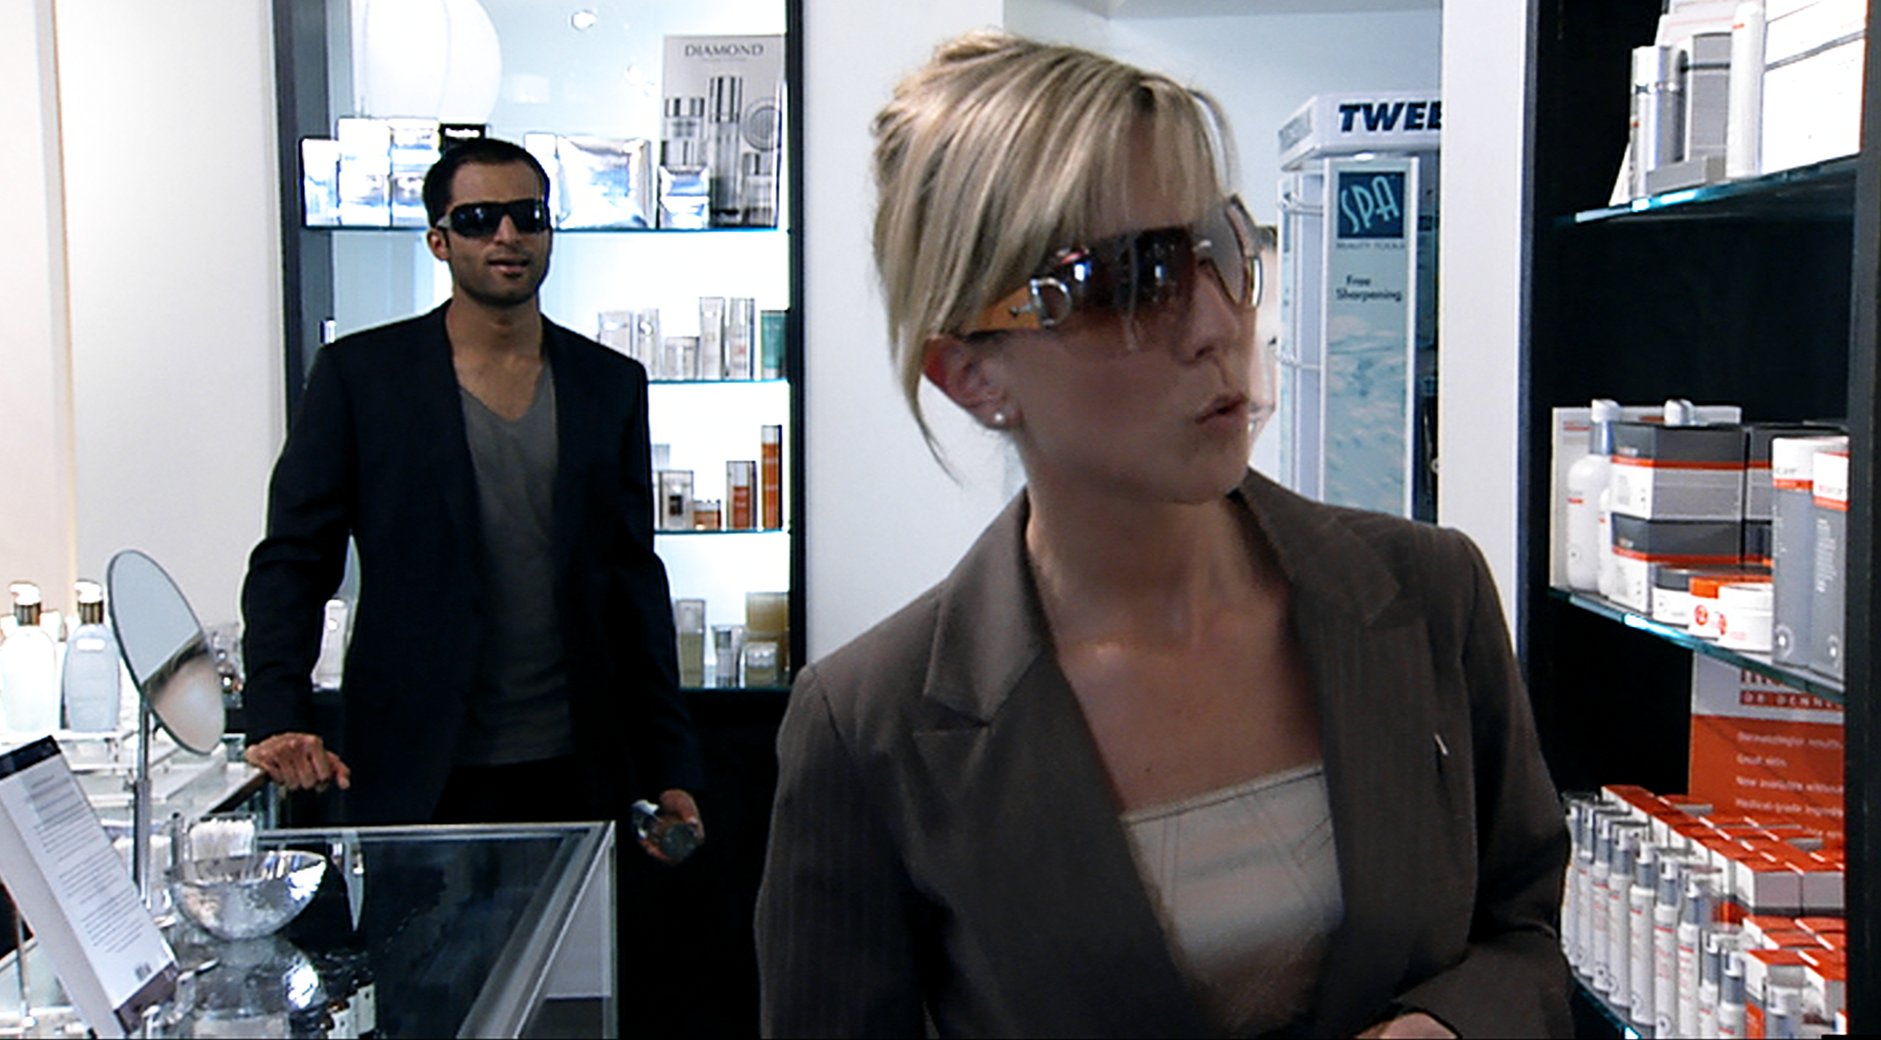 HD still from WHO'S GOOD LOOKING? written and directed by Warren Pereira showing O'Grady and Pereira.